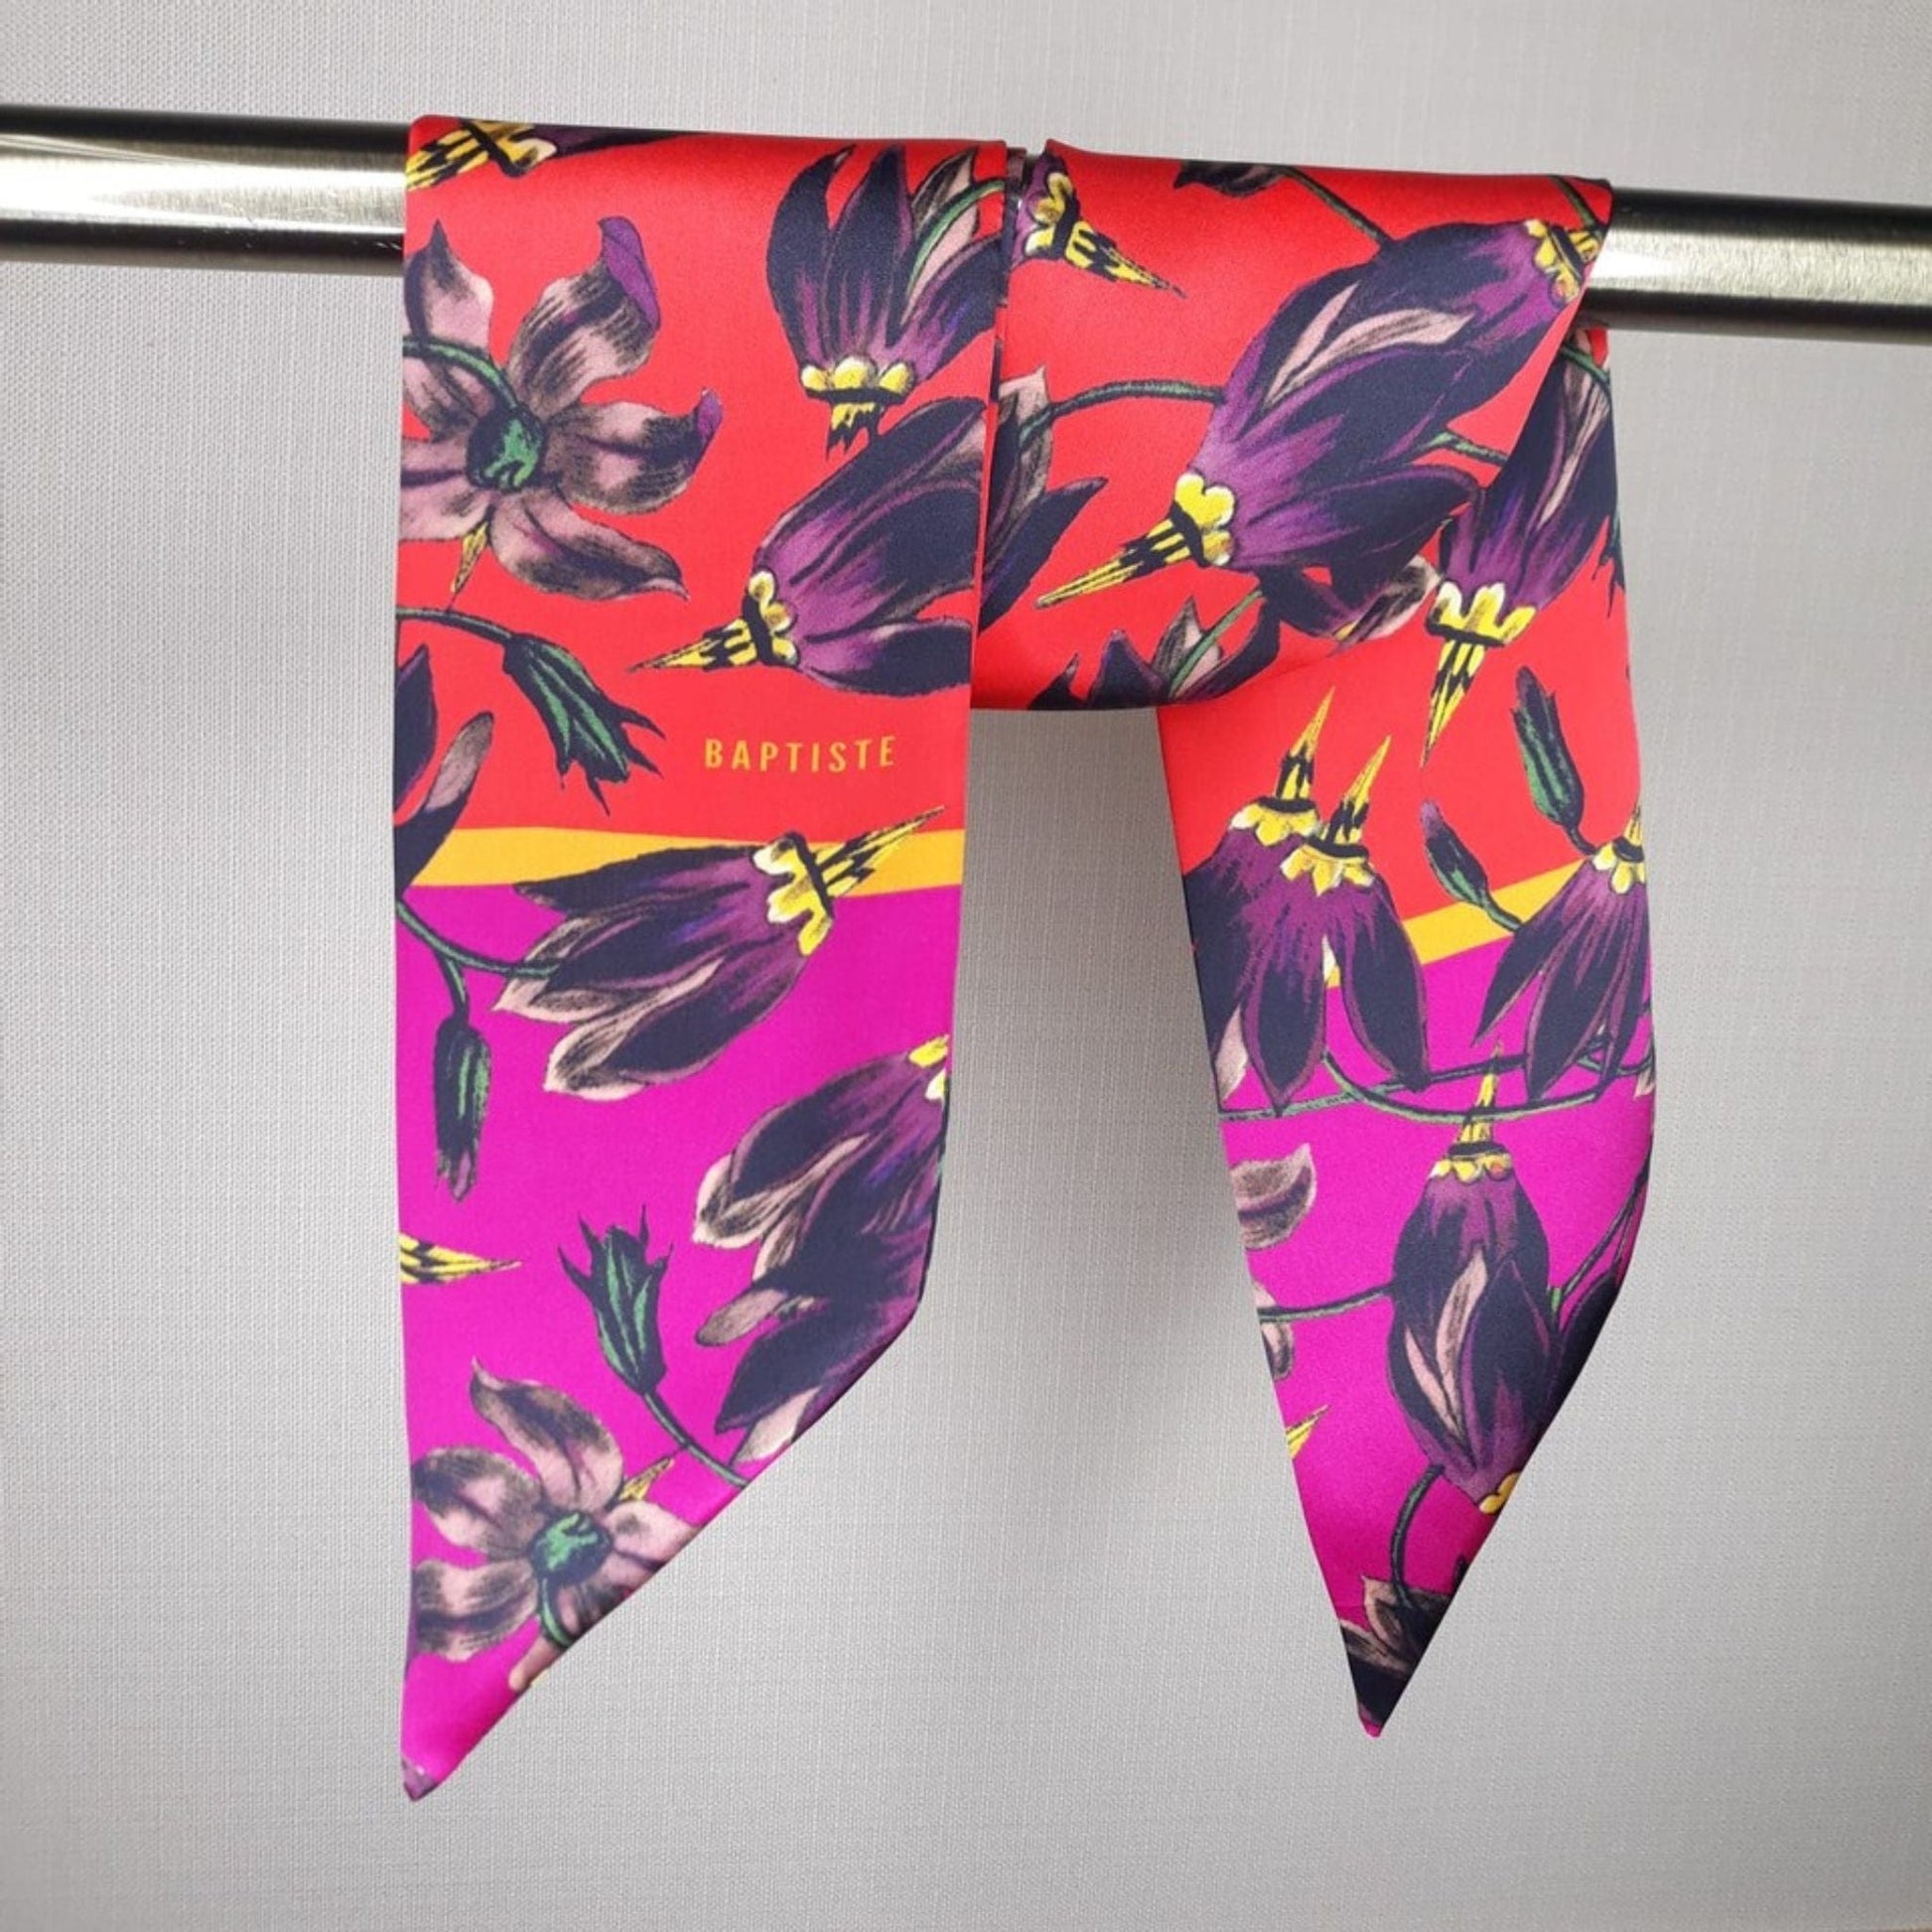 BAPTISTE Pink / Red / Twilly Scarf Pasque Print Silk Satin Twilly - Red